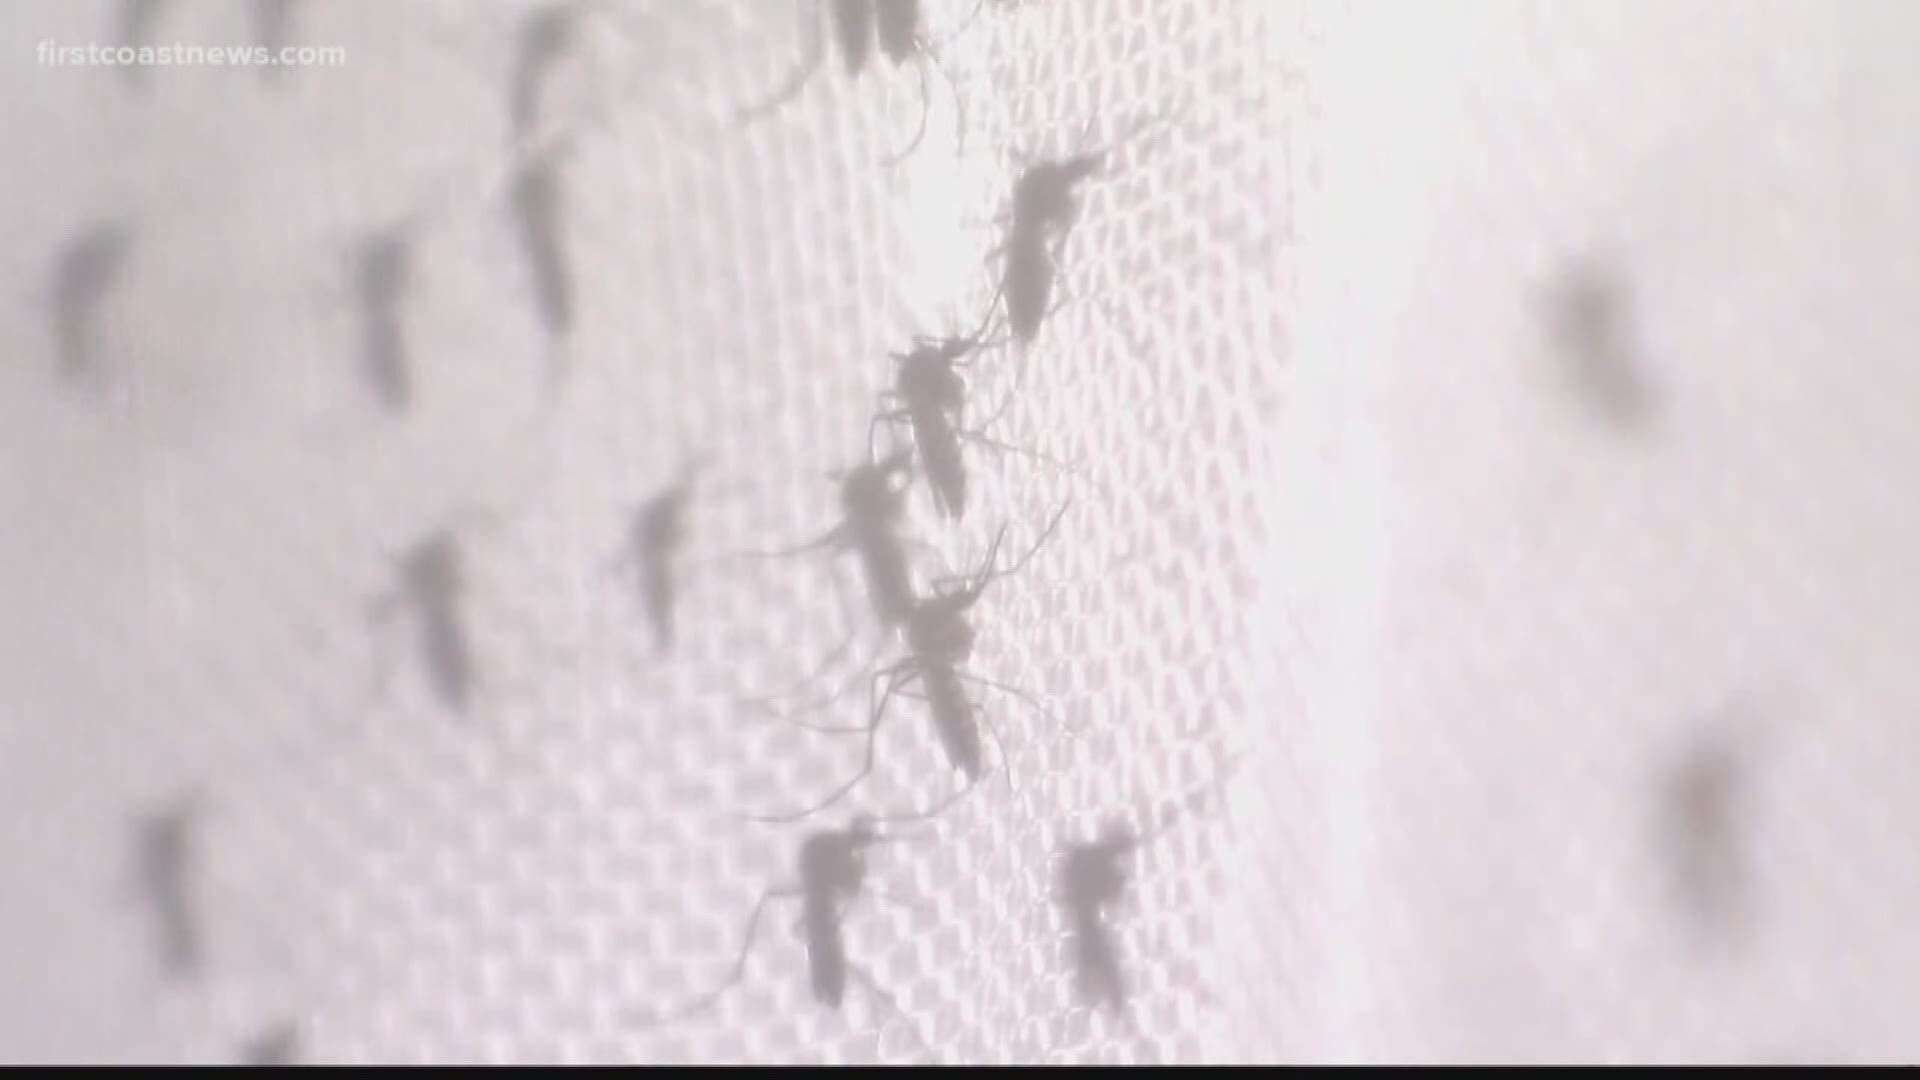 Two more human cases of the West Nile Virus were reported in Jacksonville. That makes 10 total cases in Duval County reported this year. A doctor is urging everyone not to be afraid but to be aware.